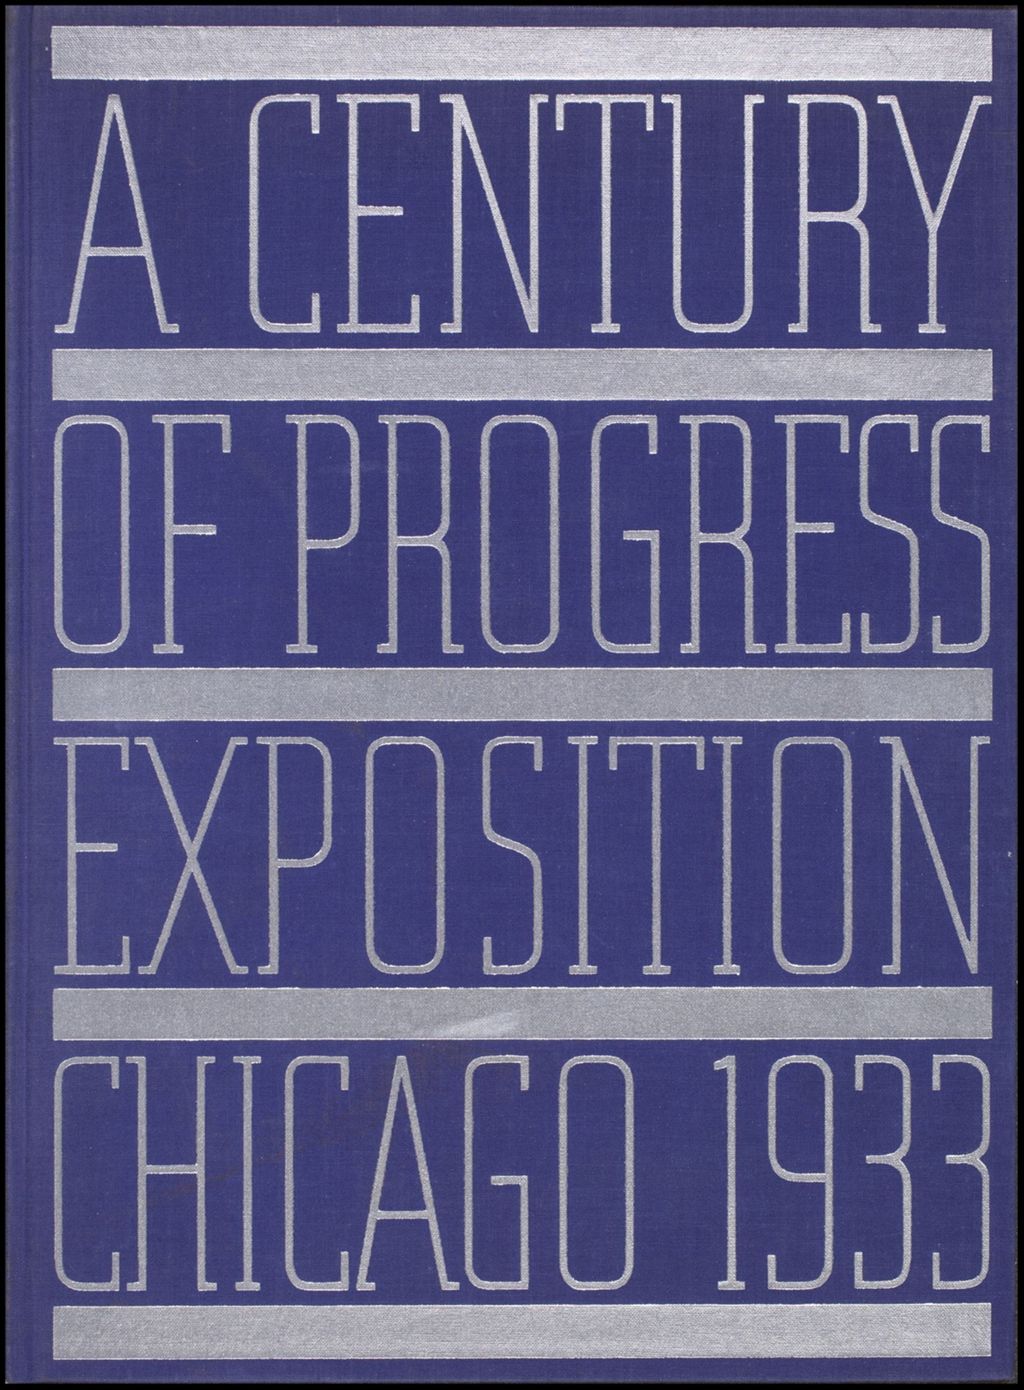 Miniature of The official pictures of A Century of Progress exposition, Chicago 1933 (Folder 16-196)